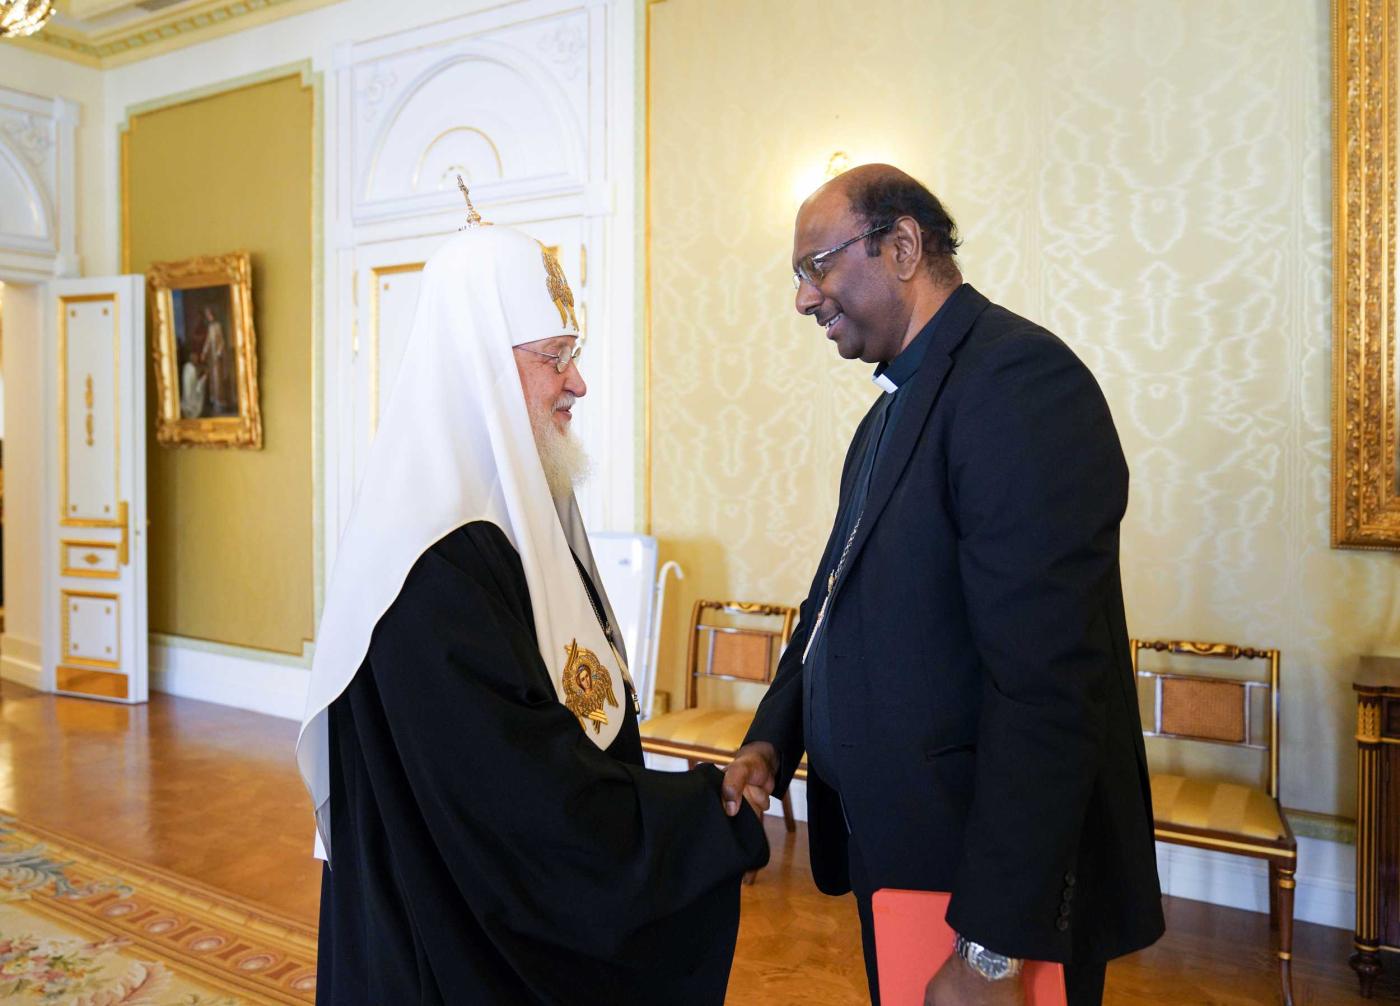 On 17 May 2023 in Moscow, a WCC delegation consisting of general secretary Rev. Prof. Dr Jerry Pillay, Director for International Affairs Mr Peter Prove, and Programme Executive for Ecumenical Relations and Faith and Order Dr Vasile-Octavian Mihoc met with His Holiness Patriarch Kirill, head of the Russian Orthodox Church.  Photo: ROC